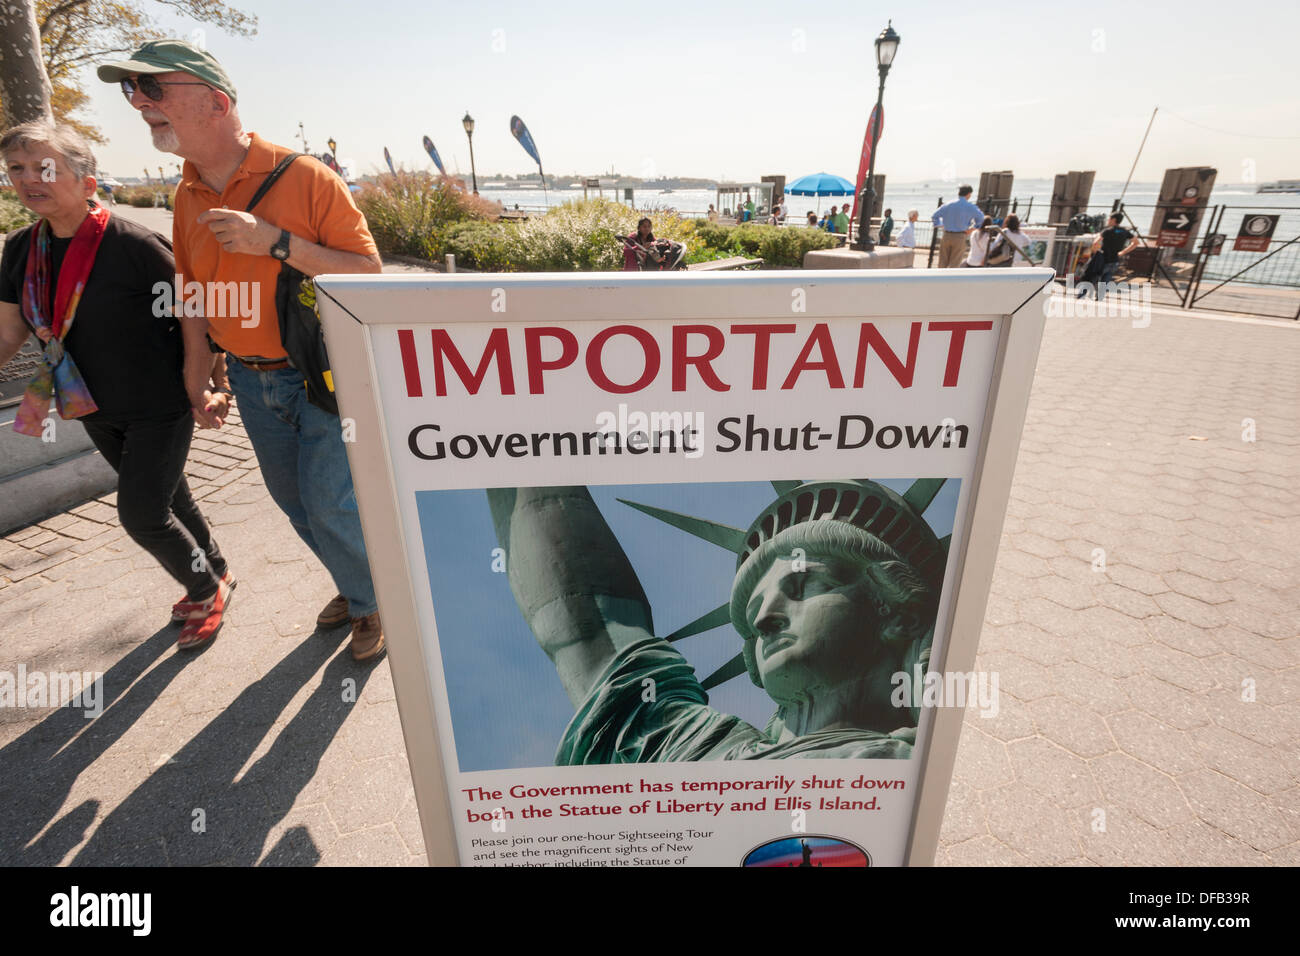 New York, USA. 1st October 2013. A sign in Battery Park in New York where ferries to the Statue of Liberty launch informs tourists that the statue is closed, seen on Tuesday, October 1, 2013. A partial government shutdown took effect today because of a dispute between Democrats and Republicans in Congress over the Obamacare program. Approximately 800,000 federal workers have been furloughed and only essential services are up and running.  Credit:  Richard B. Levine/Alamy Live News Stock Photo